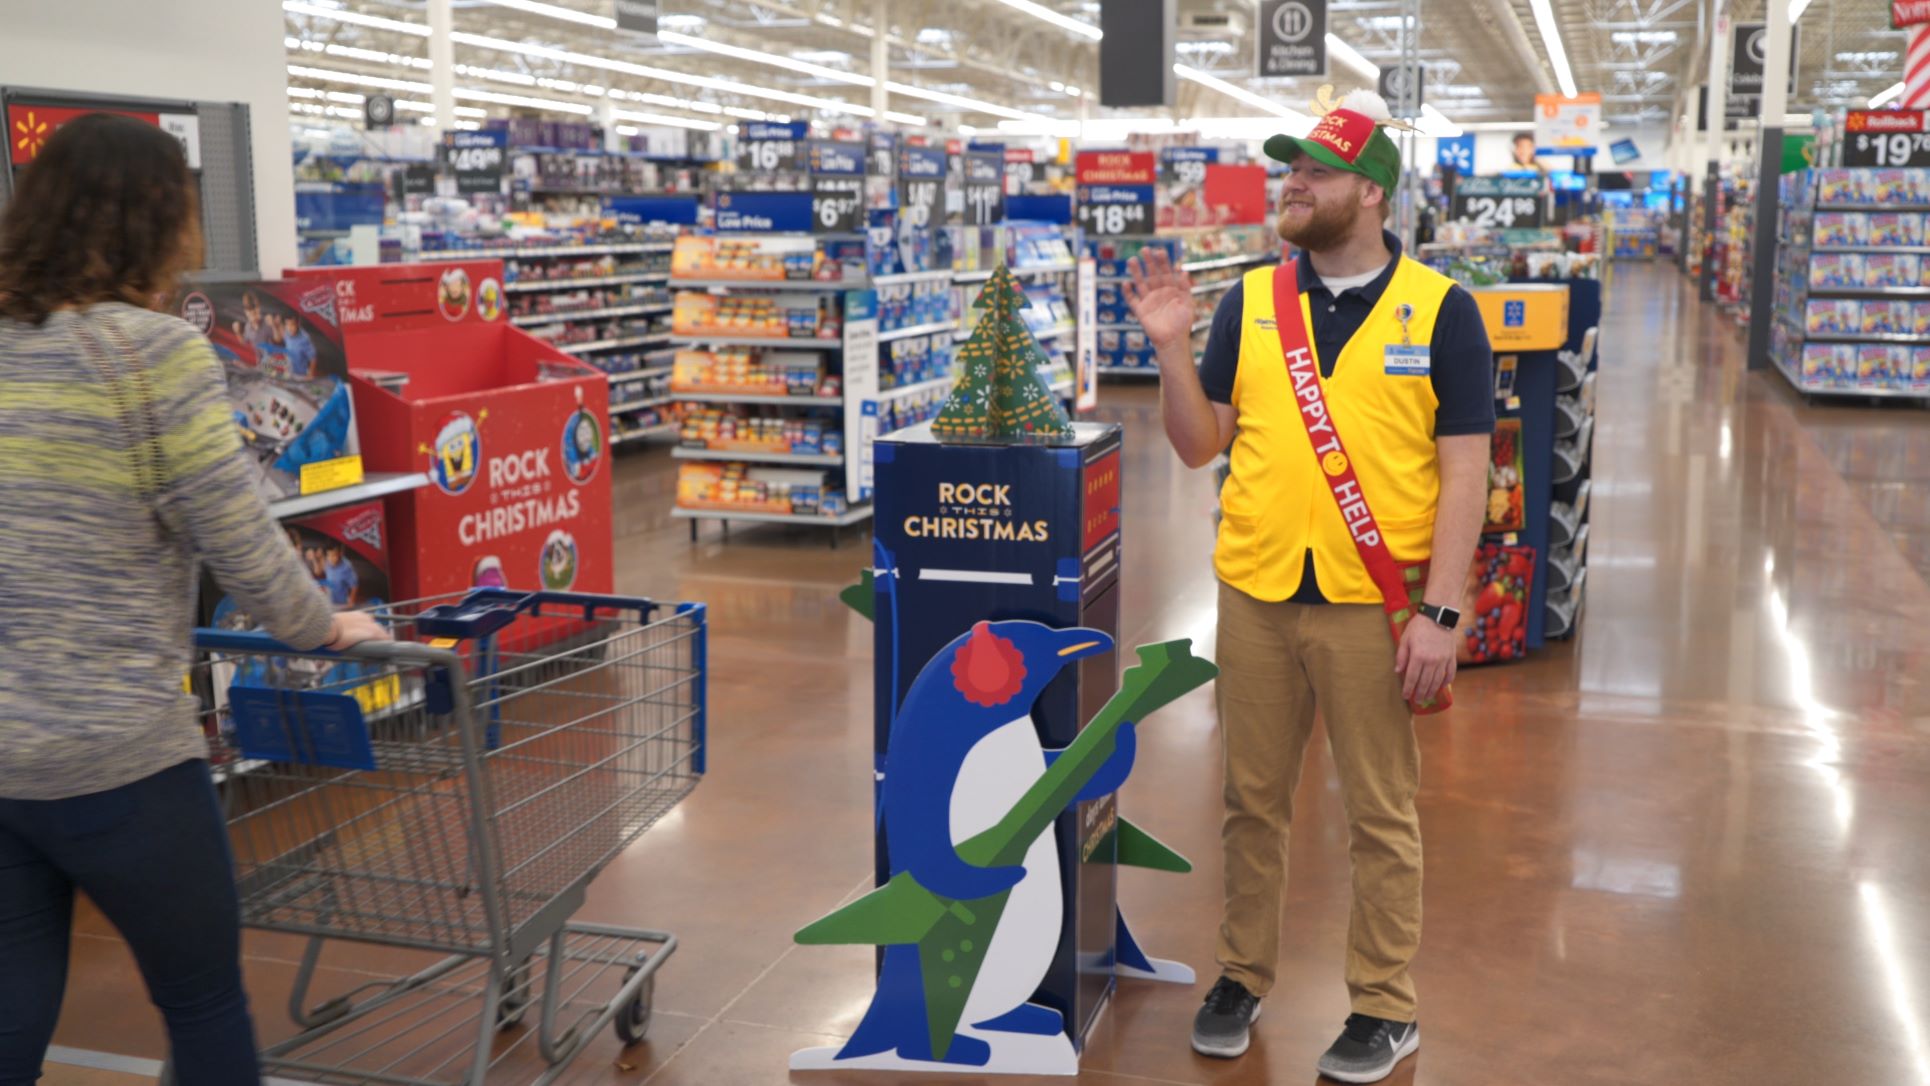 Walmart employee greets shopper to the store's full inventory shelves